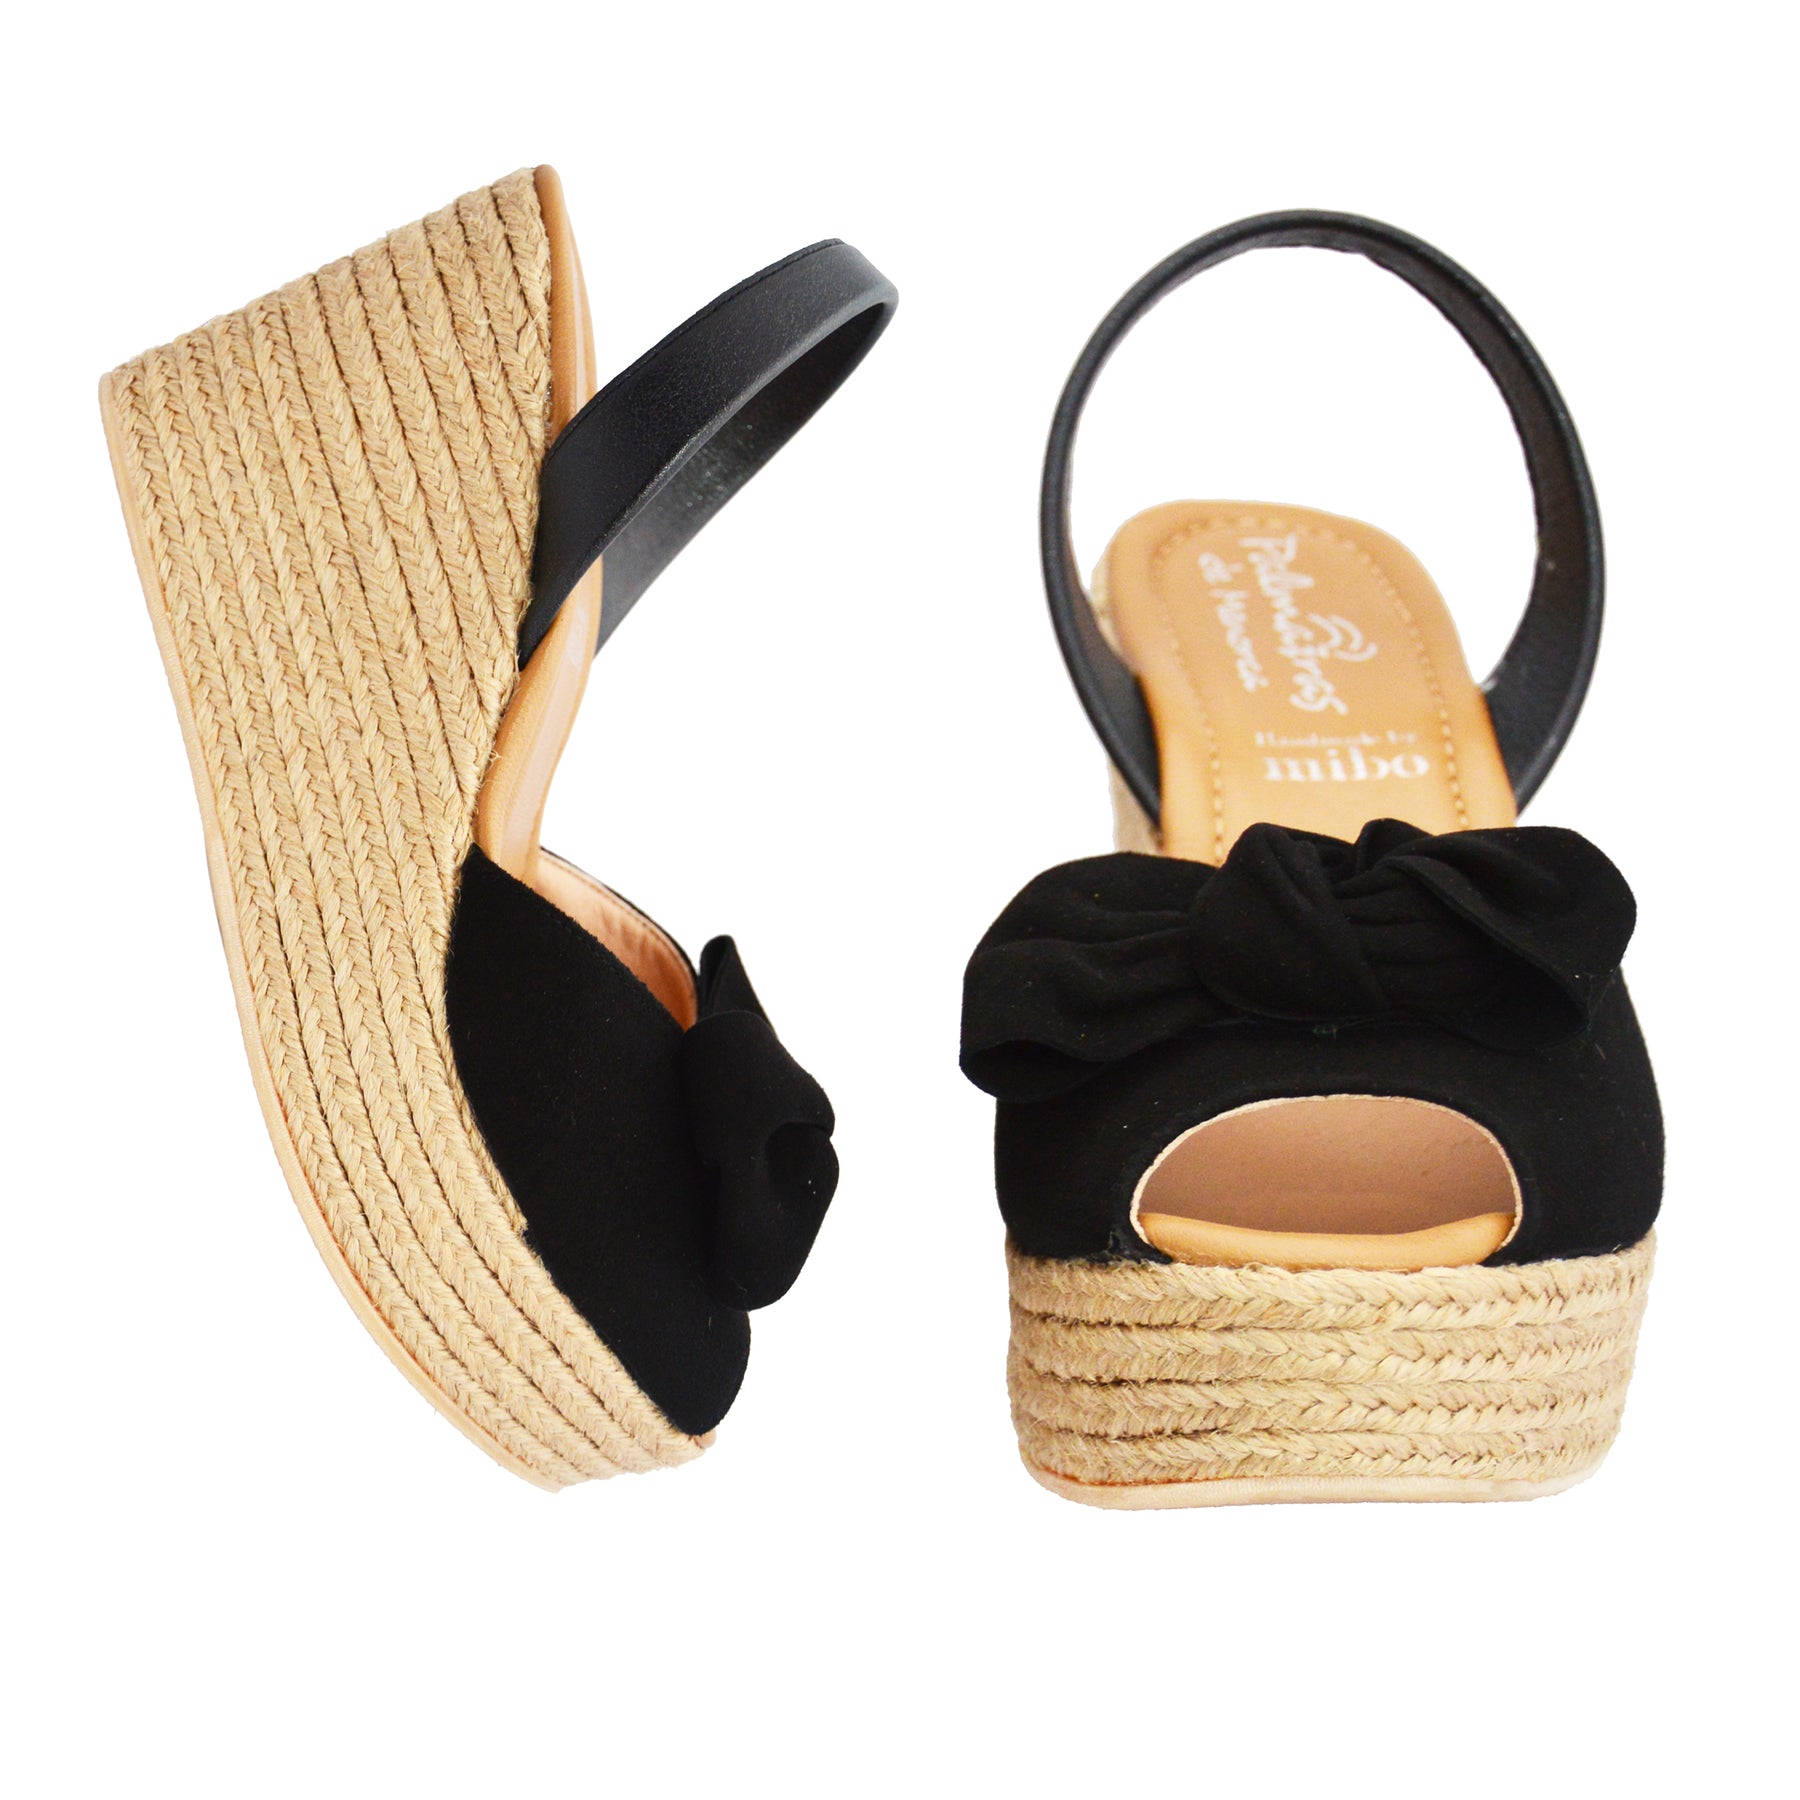 Mid Height Espadrille Wedge Avarca Slingback Sandals in Black Suede with Bow Embellishment